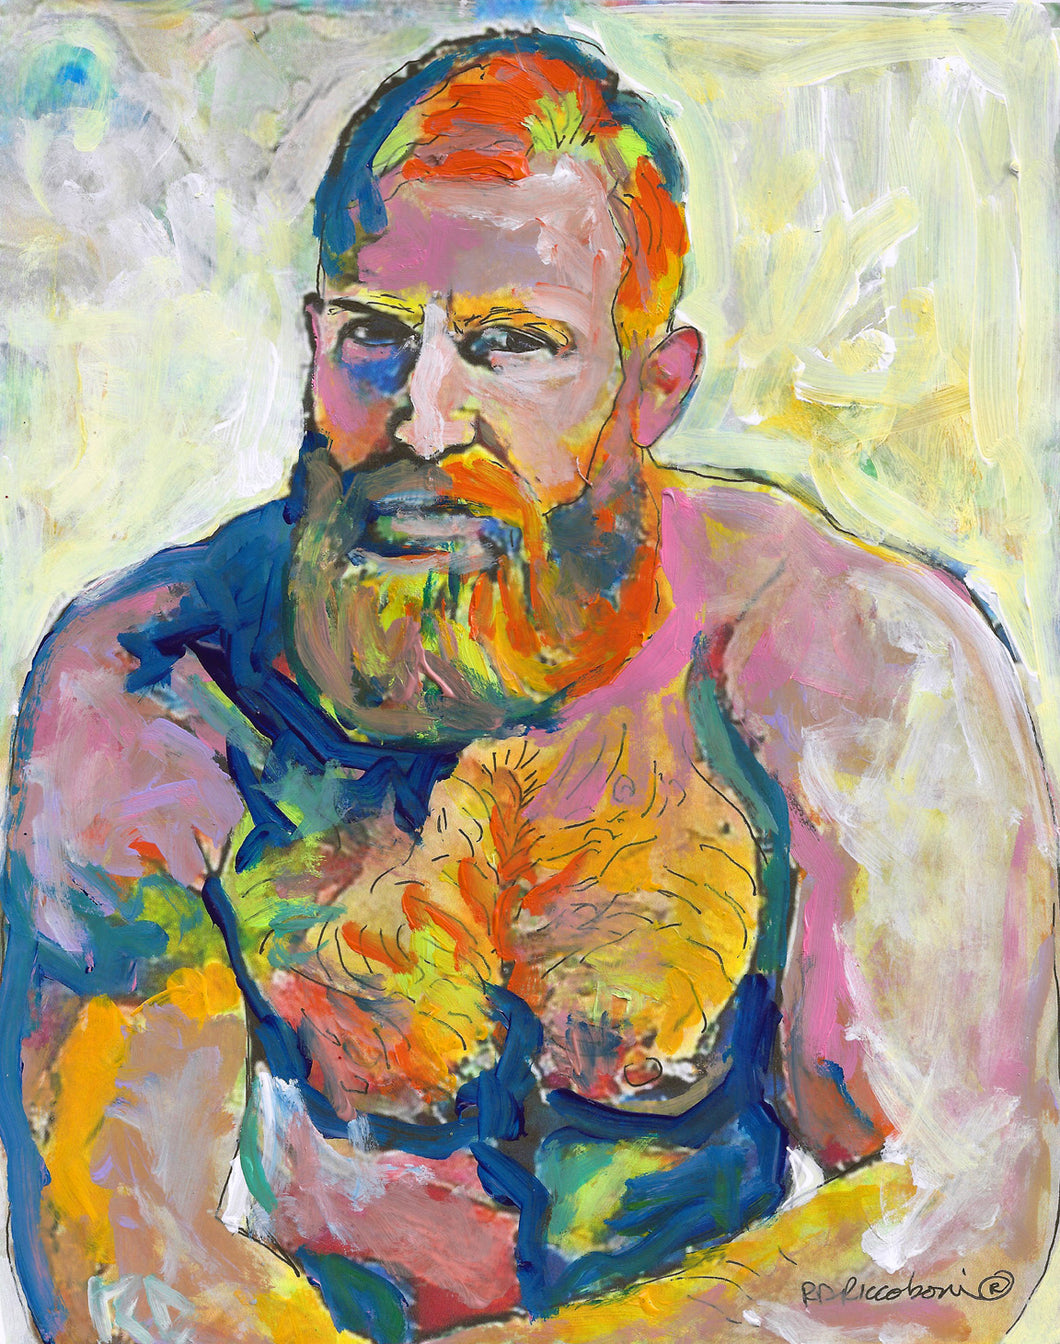 Fire Island Van Gogh  Goes to Tea Dance- Man With The Red Beard - Beefcake Painterly Style hand signed art painting print